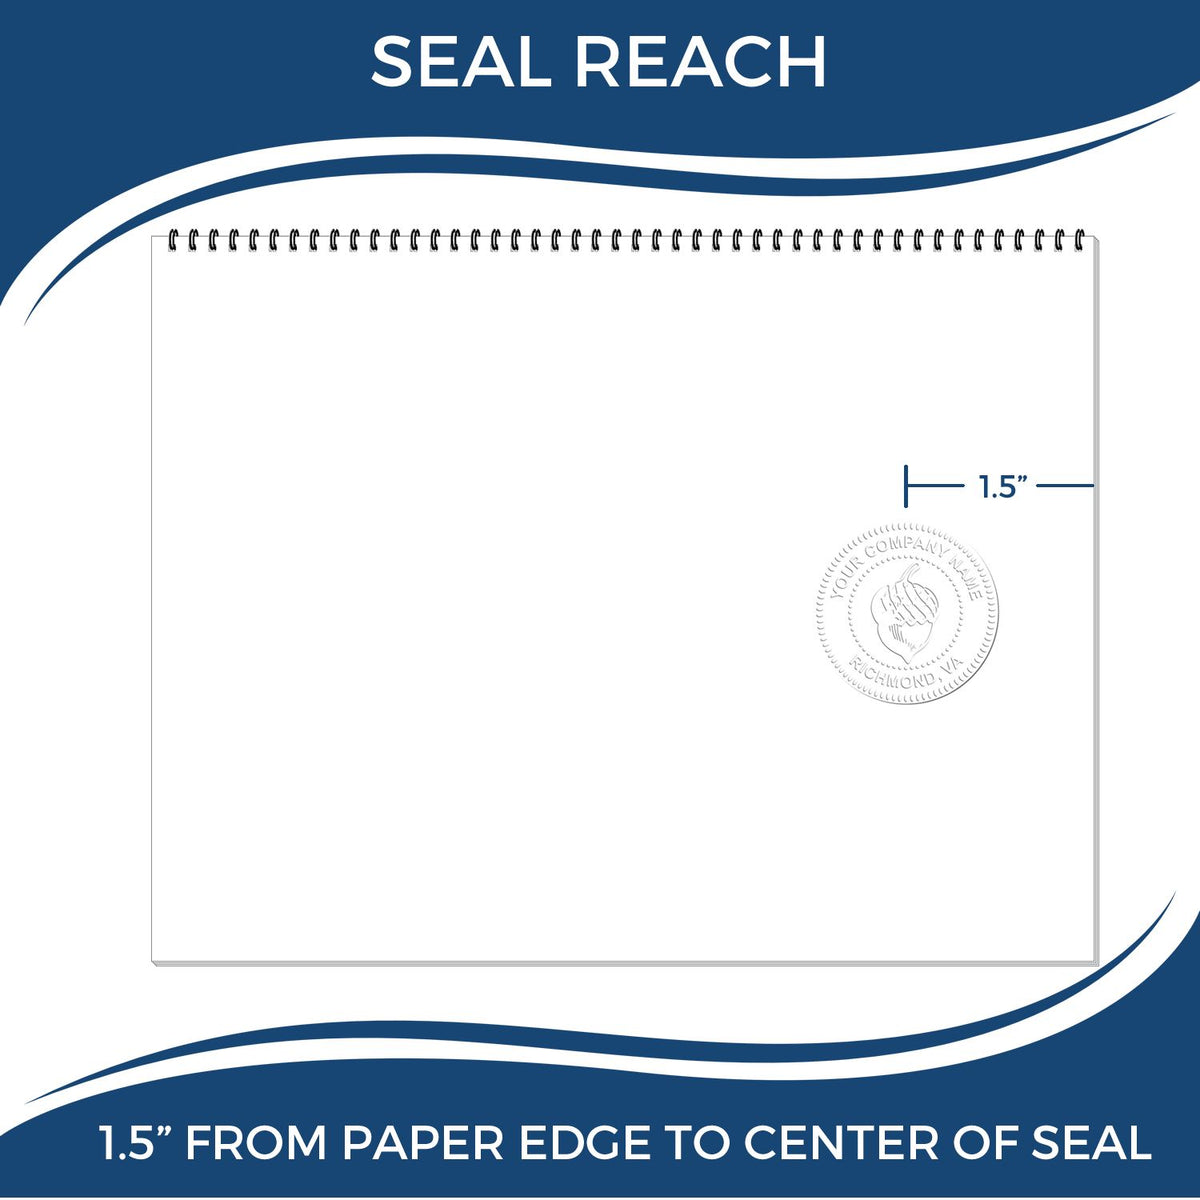 An infographic showing the seal reach which is represented by a ruler and a miniature seal image of the North Carolina Engineer Desk Seal